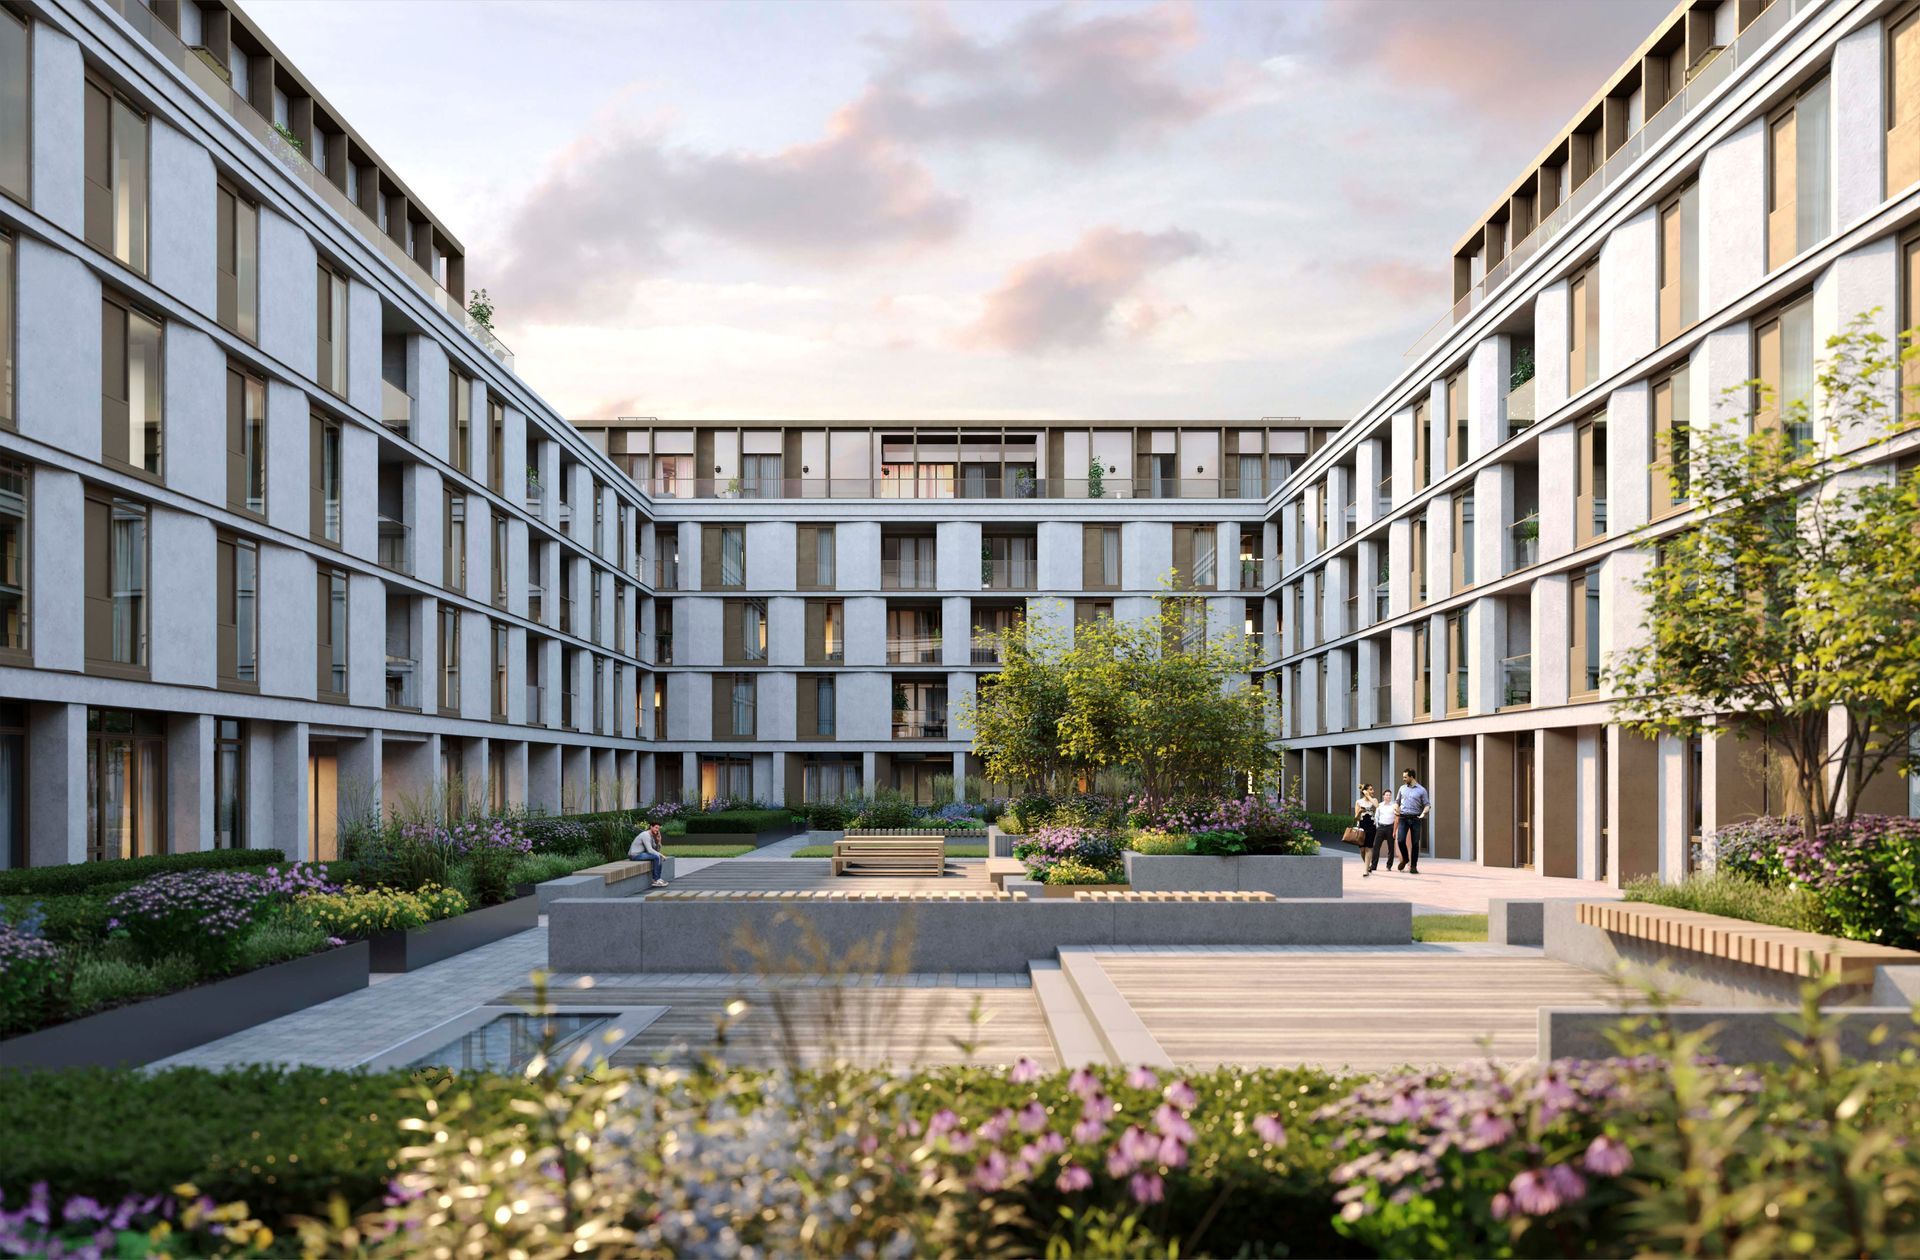 An artist 's impression of a courtyard between two large buildings at Walton Court.